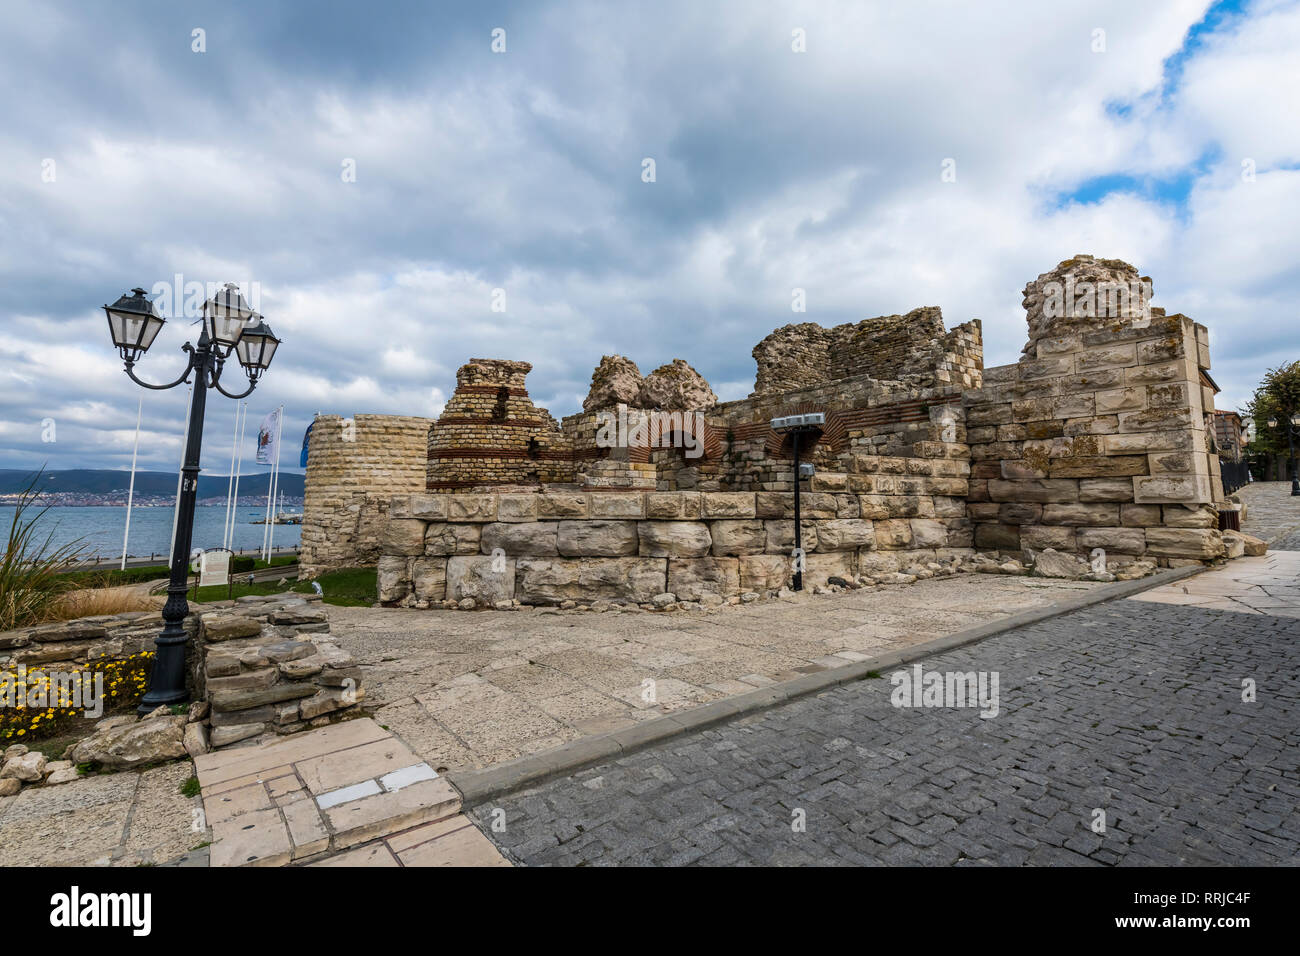 Ruins of medieval fortification walls, Nessebar, UNESCO World Heritage Site, Bulgaria, Europe Stock Photo